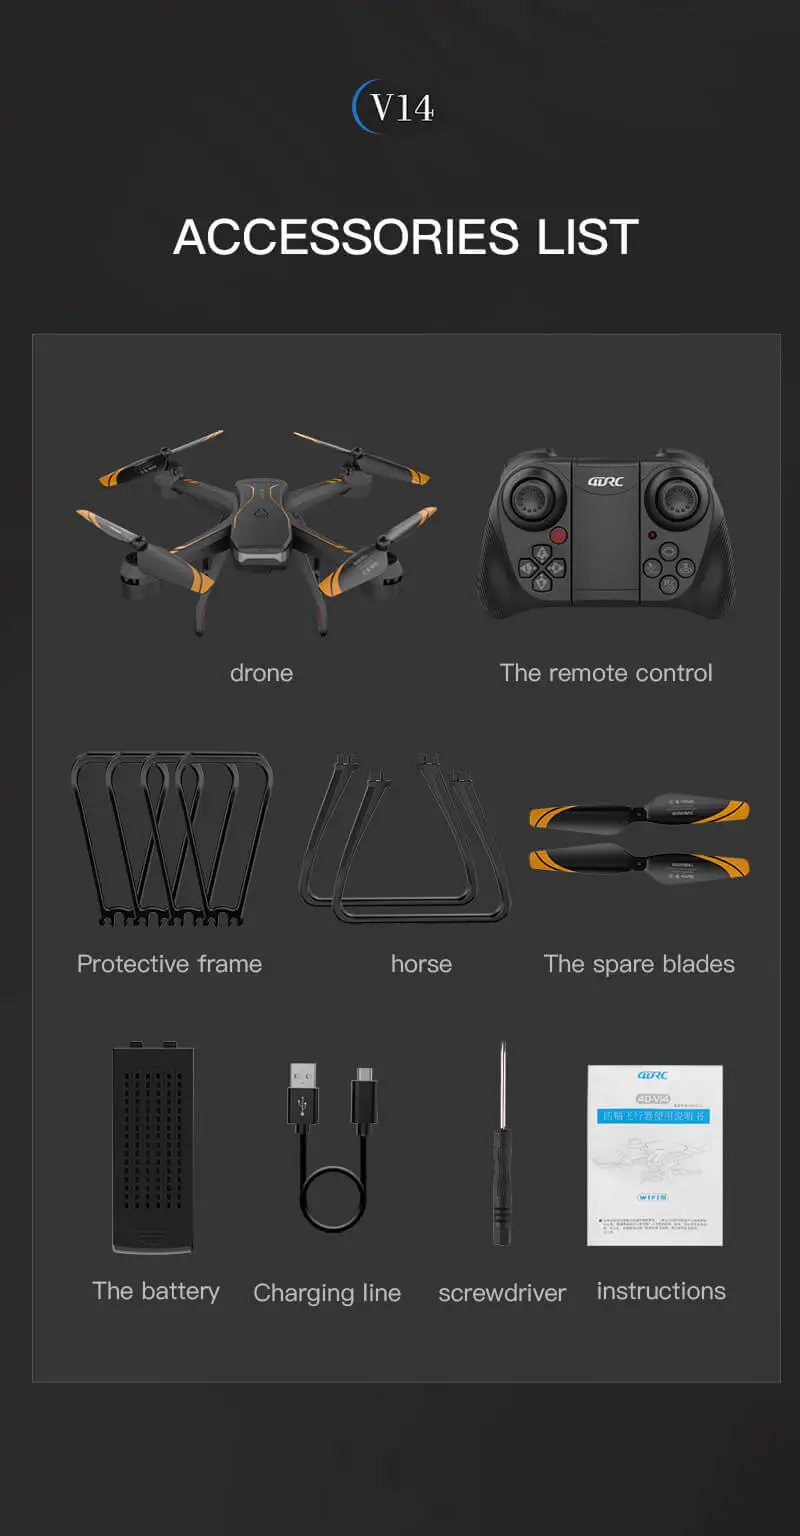 4drc v14 drone hd aerial photography wifi real time image transmission remote control quadcopter with rechargeable battery helicopter toys for beginners and adults details 15